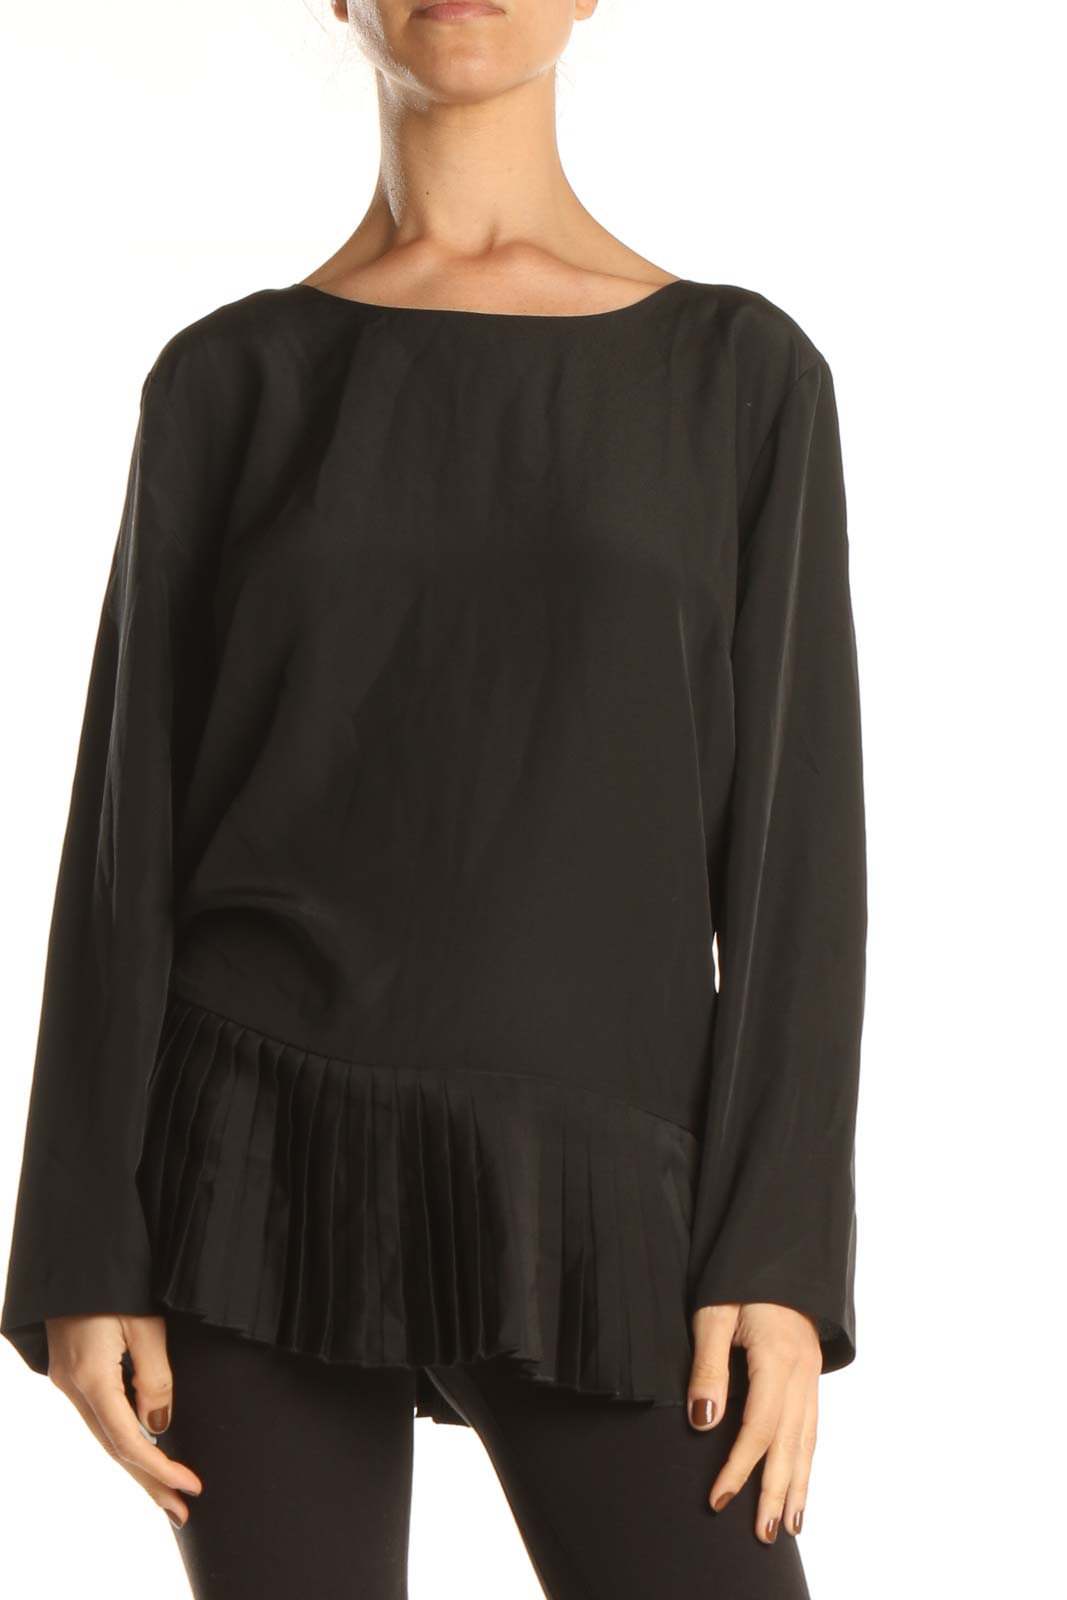 Black All Day Wear Pleated Top Front